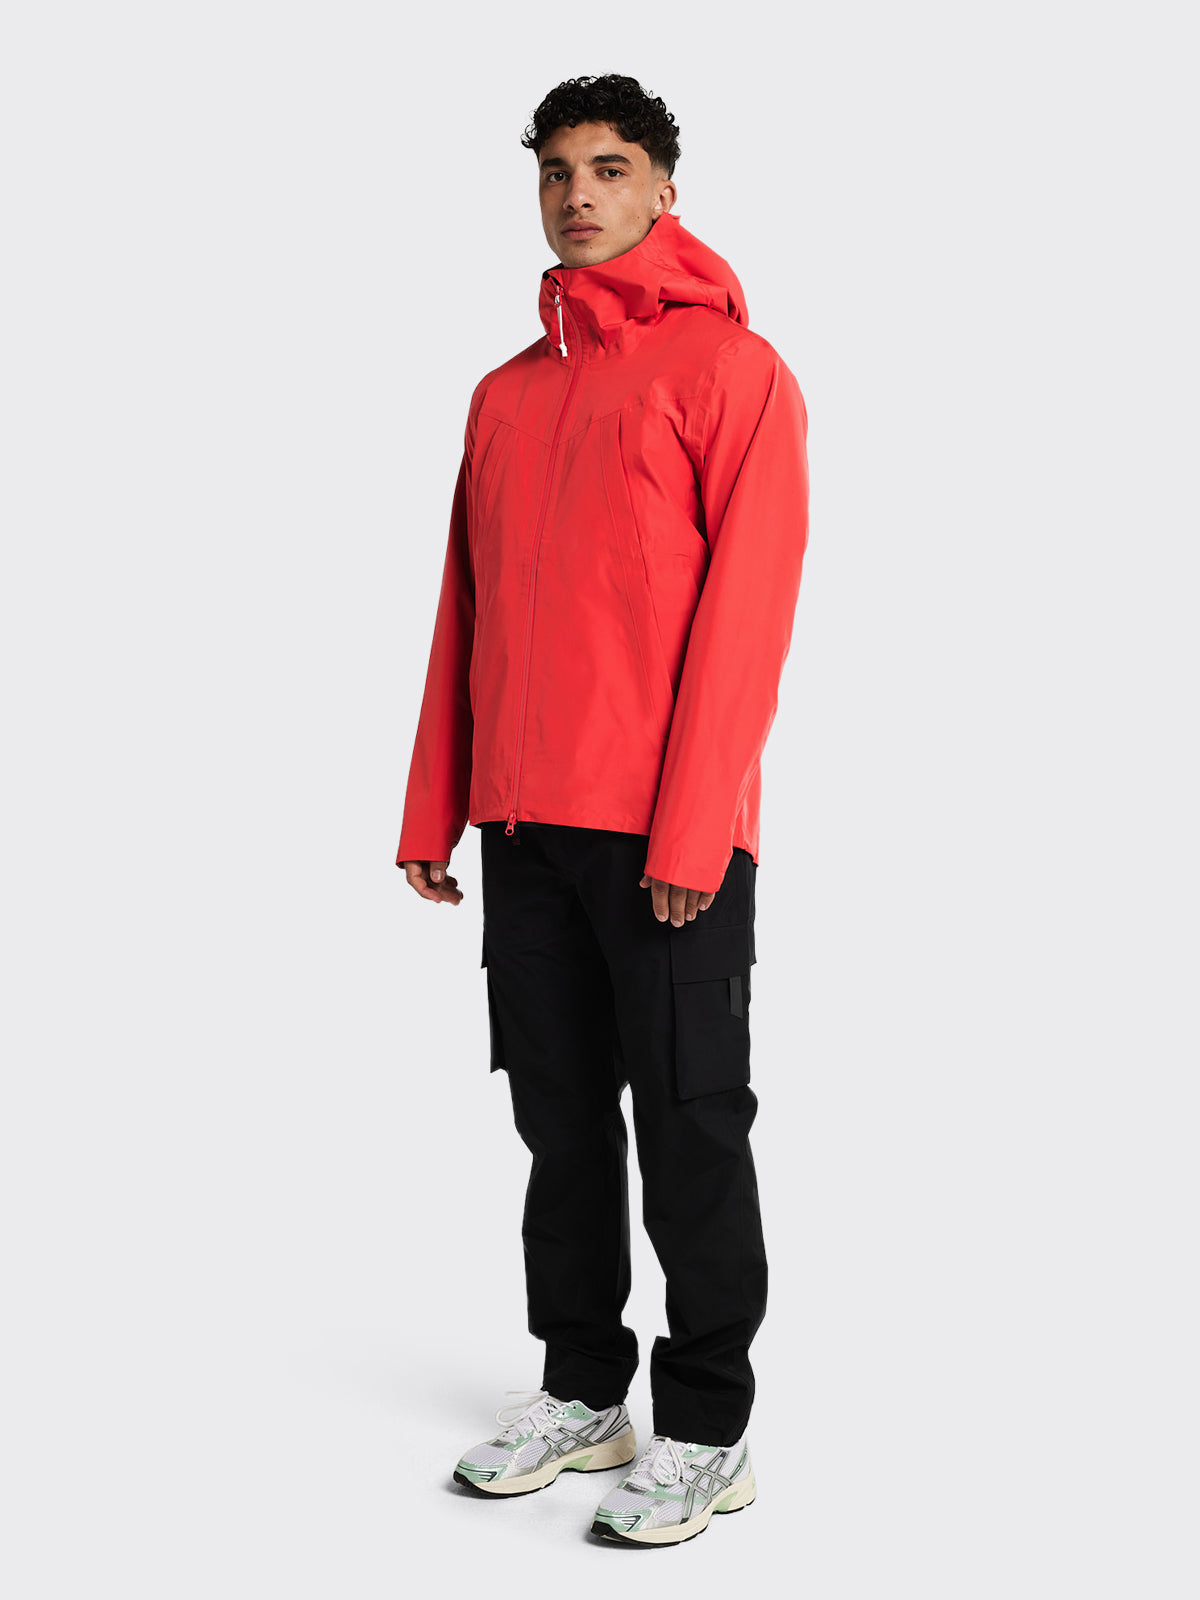 Man dressed in Helleren RS jacket by Blæst in the color Pat Red